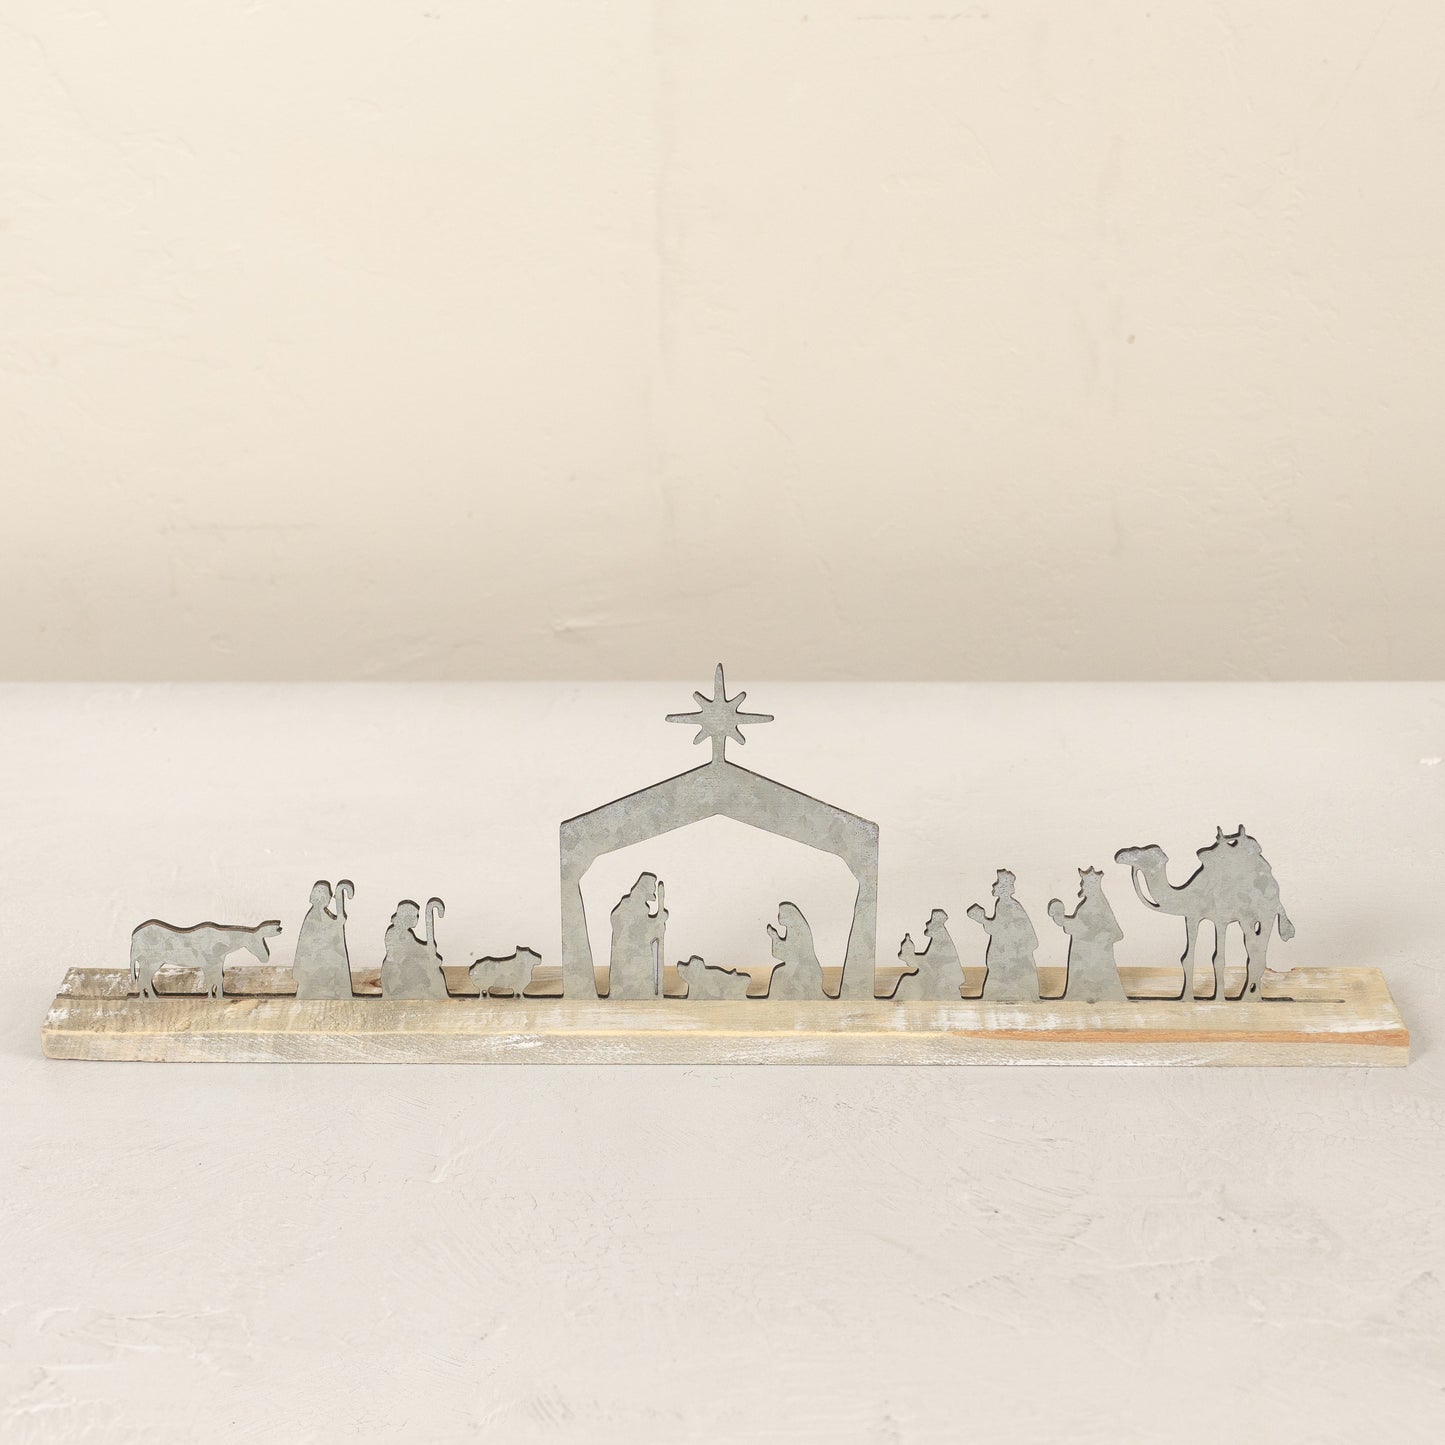 Metal Nativity on a Wooden Stand